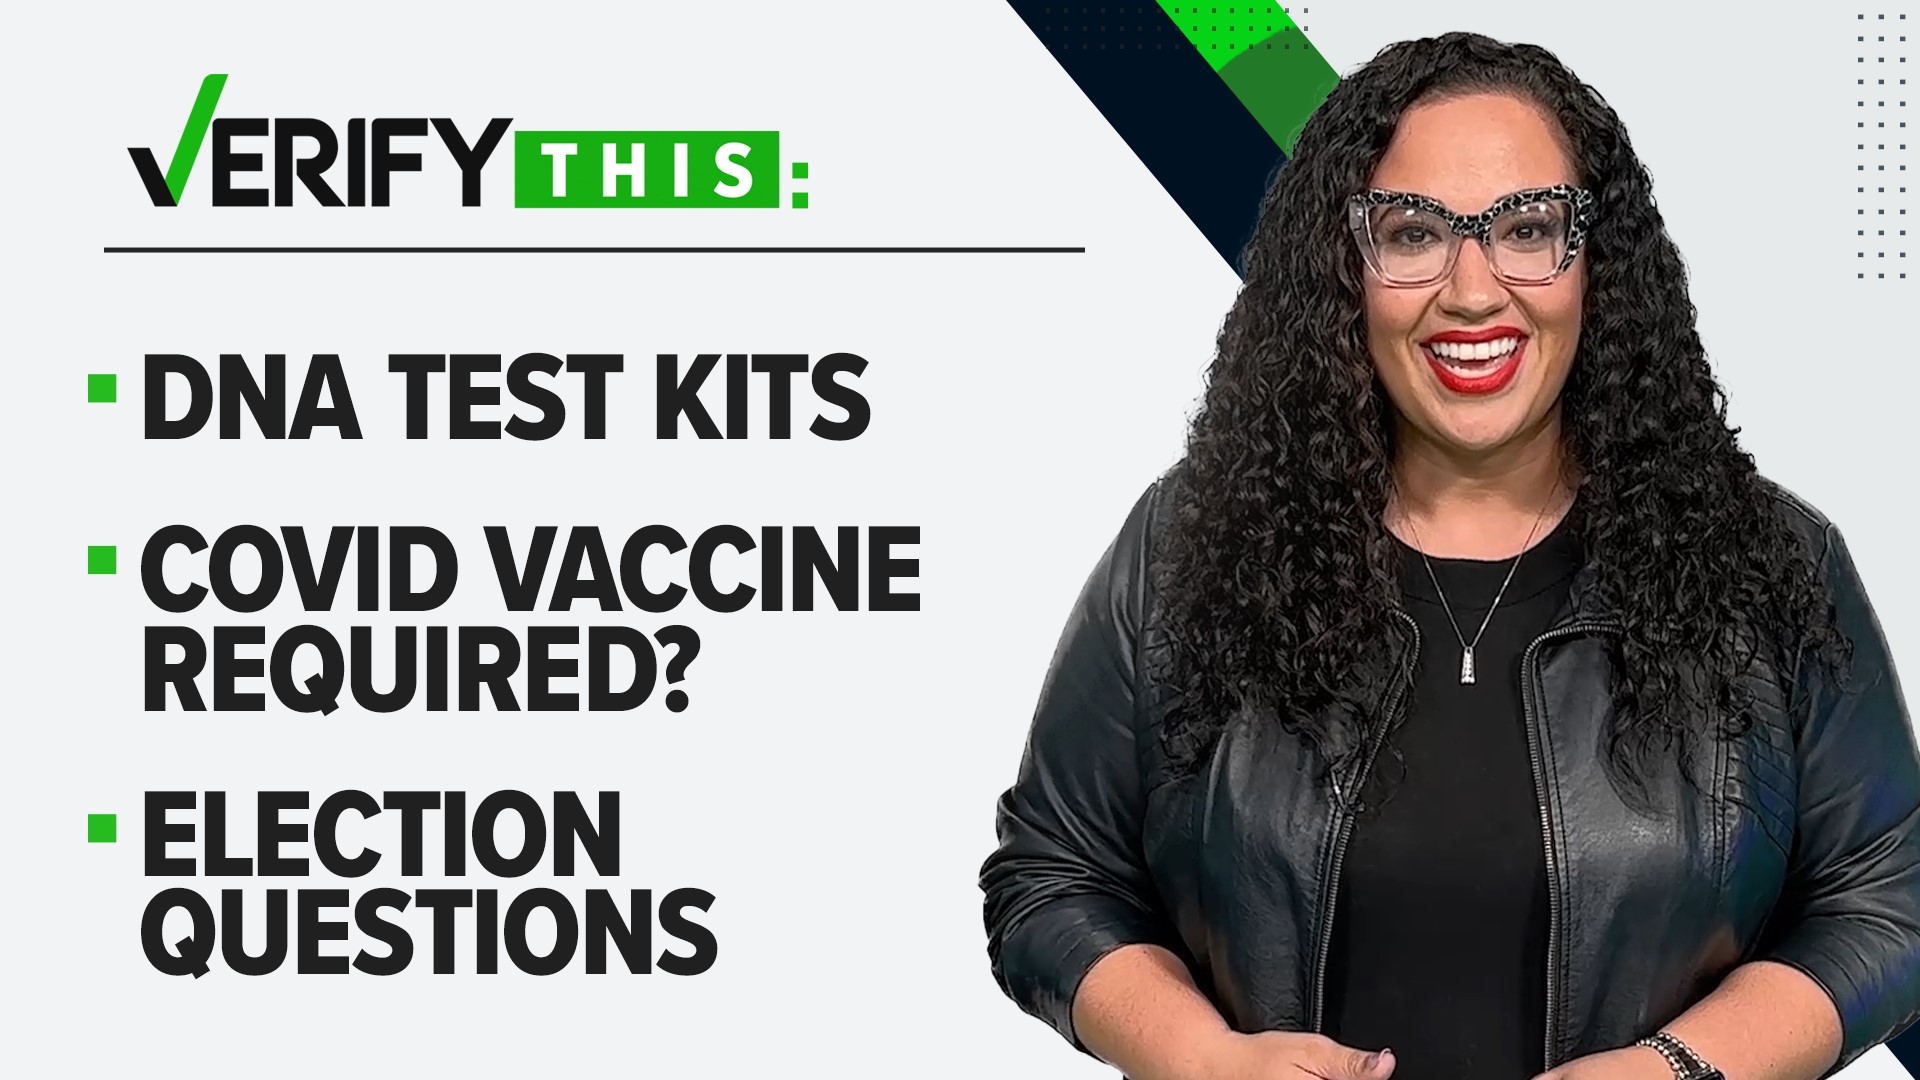 Fact-checking viral claims dealing with DNA test kits for students, COVID vaccine mandates in schools, election questions, and a viral video of "Nancy Pelosi."